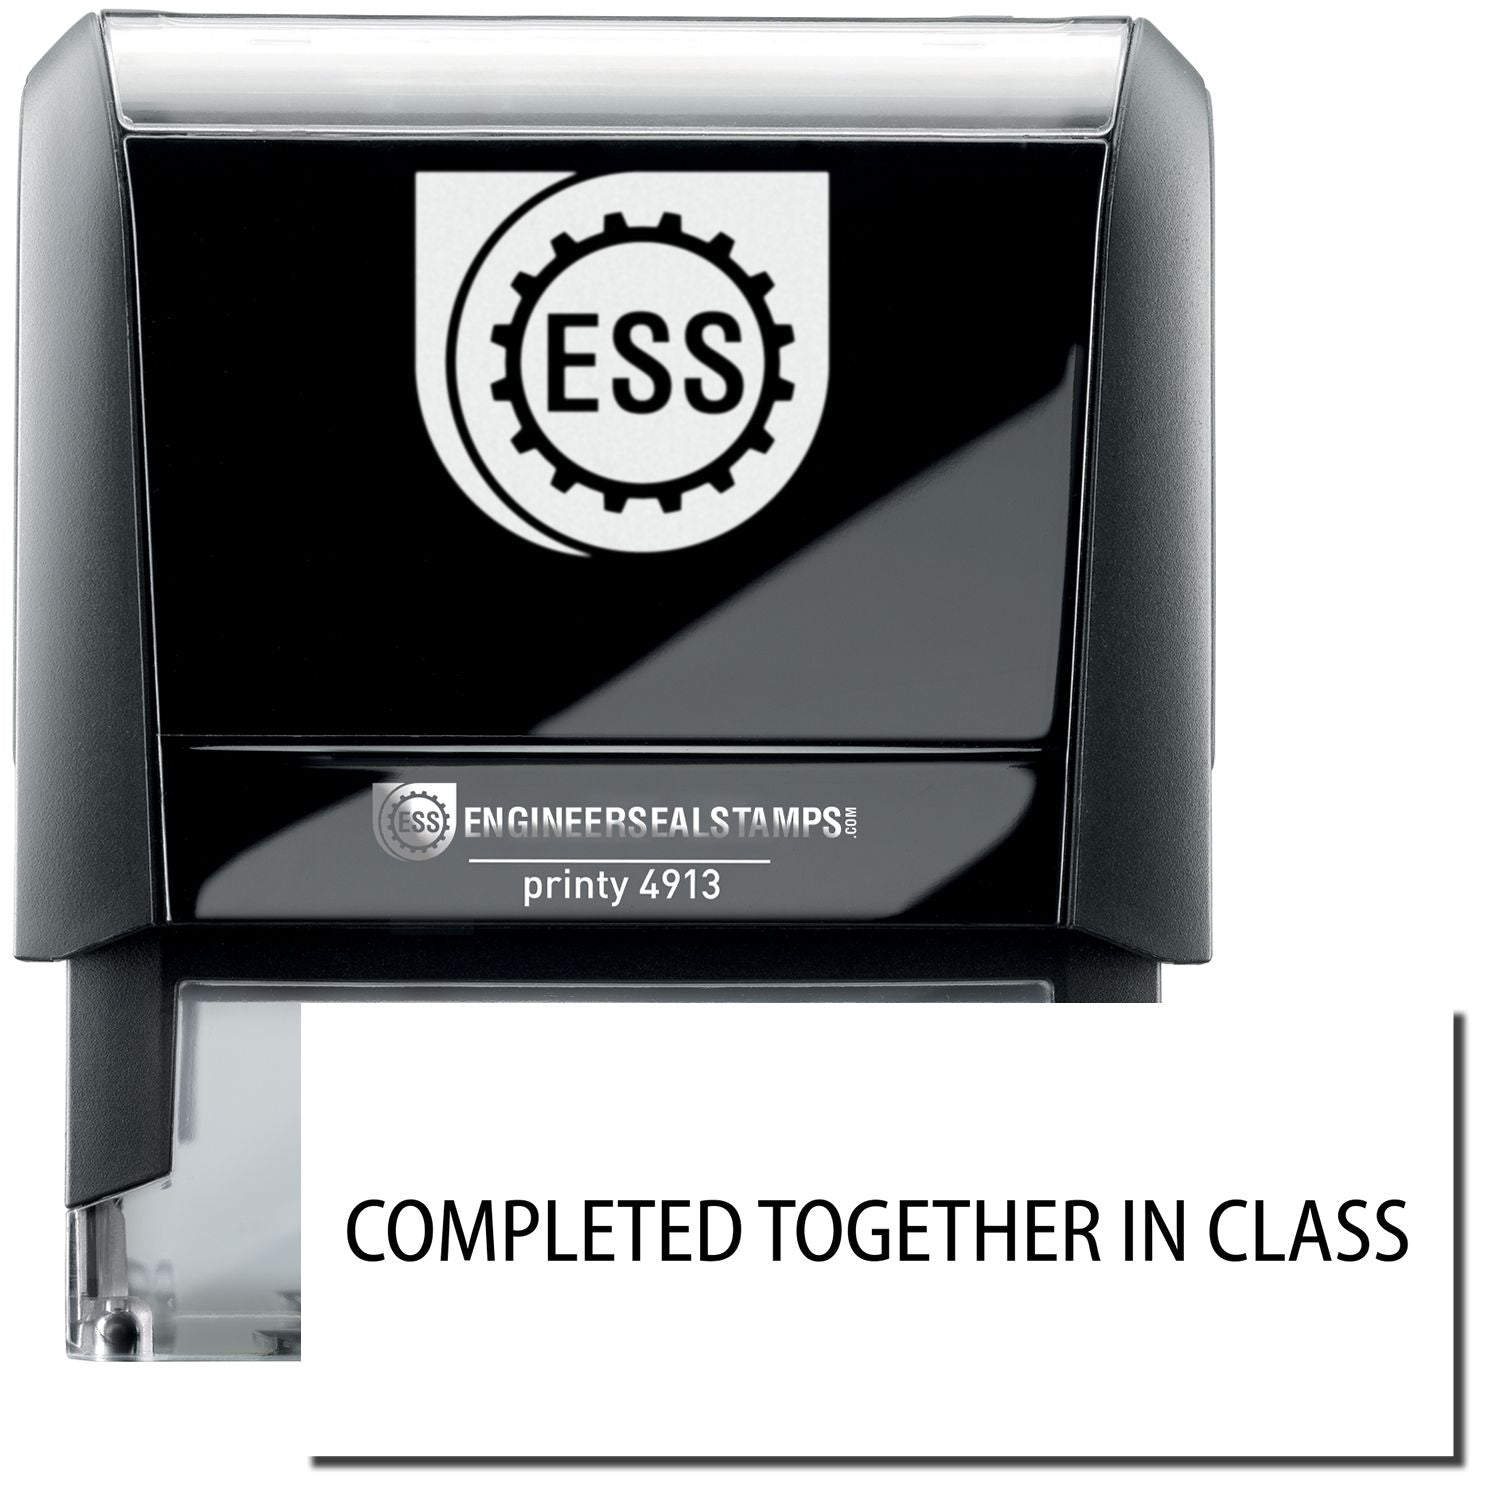 A self-inking stamp with a stamped image showing how the text "COMPLETED TOGETHER IN CLASS" in a large font is displayed by it after stamping.